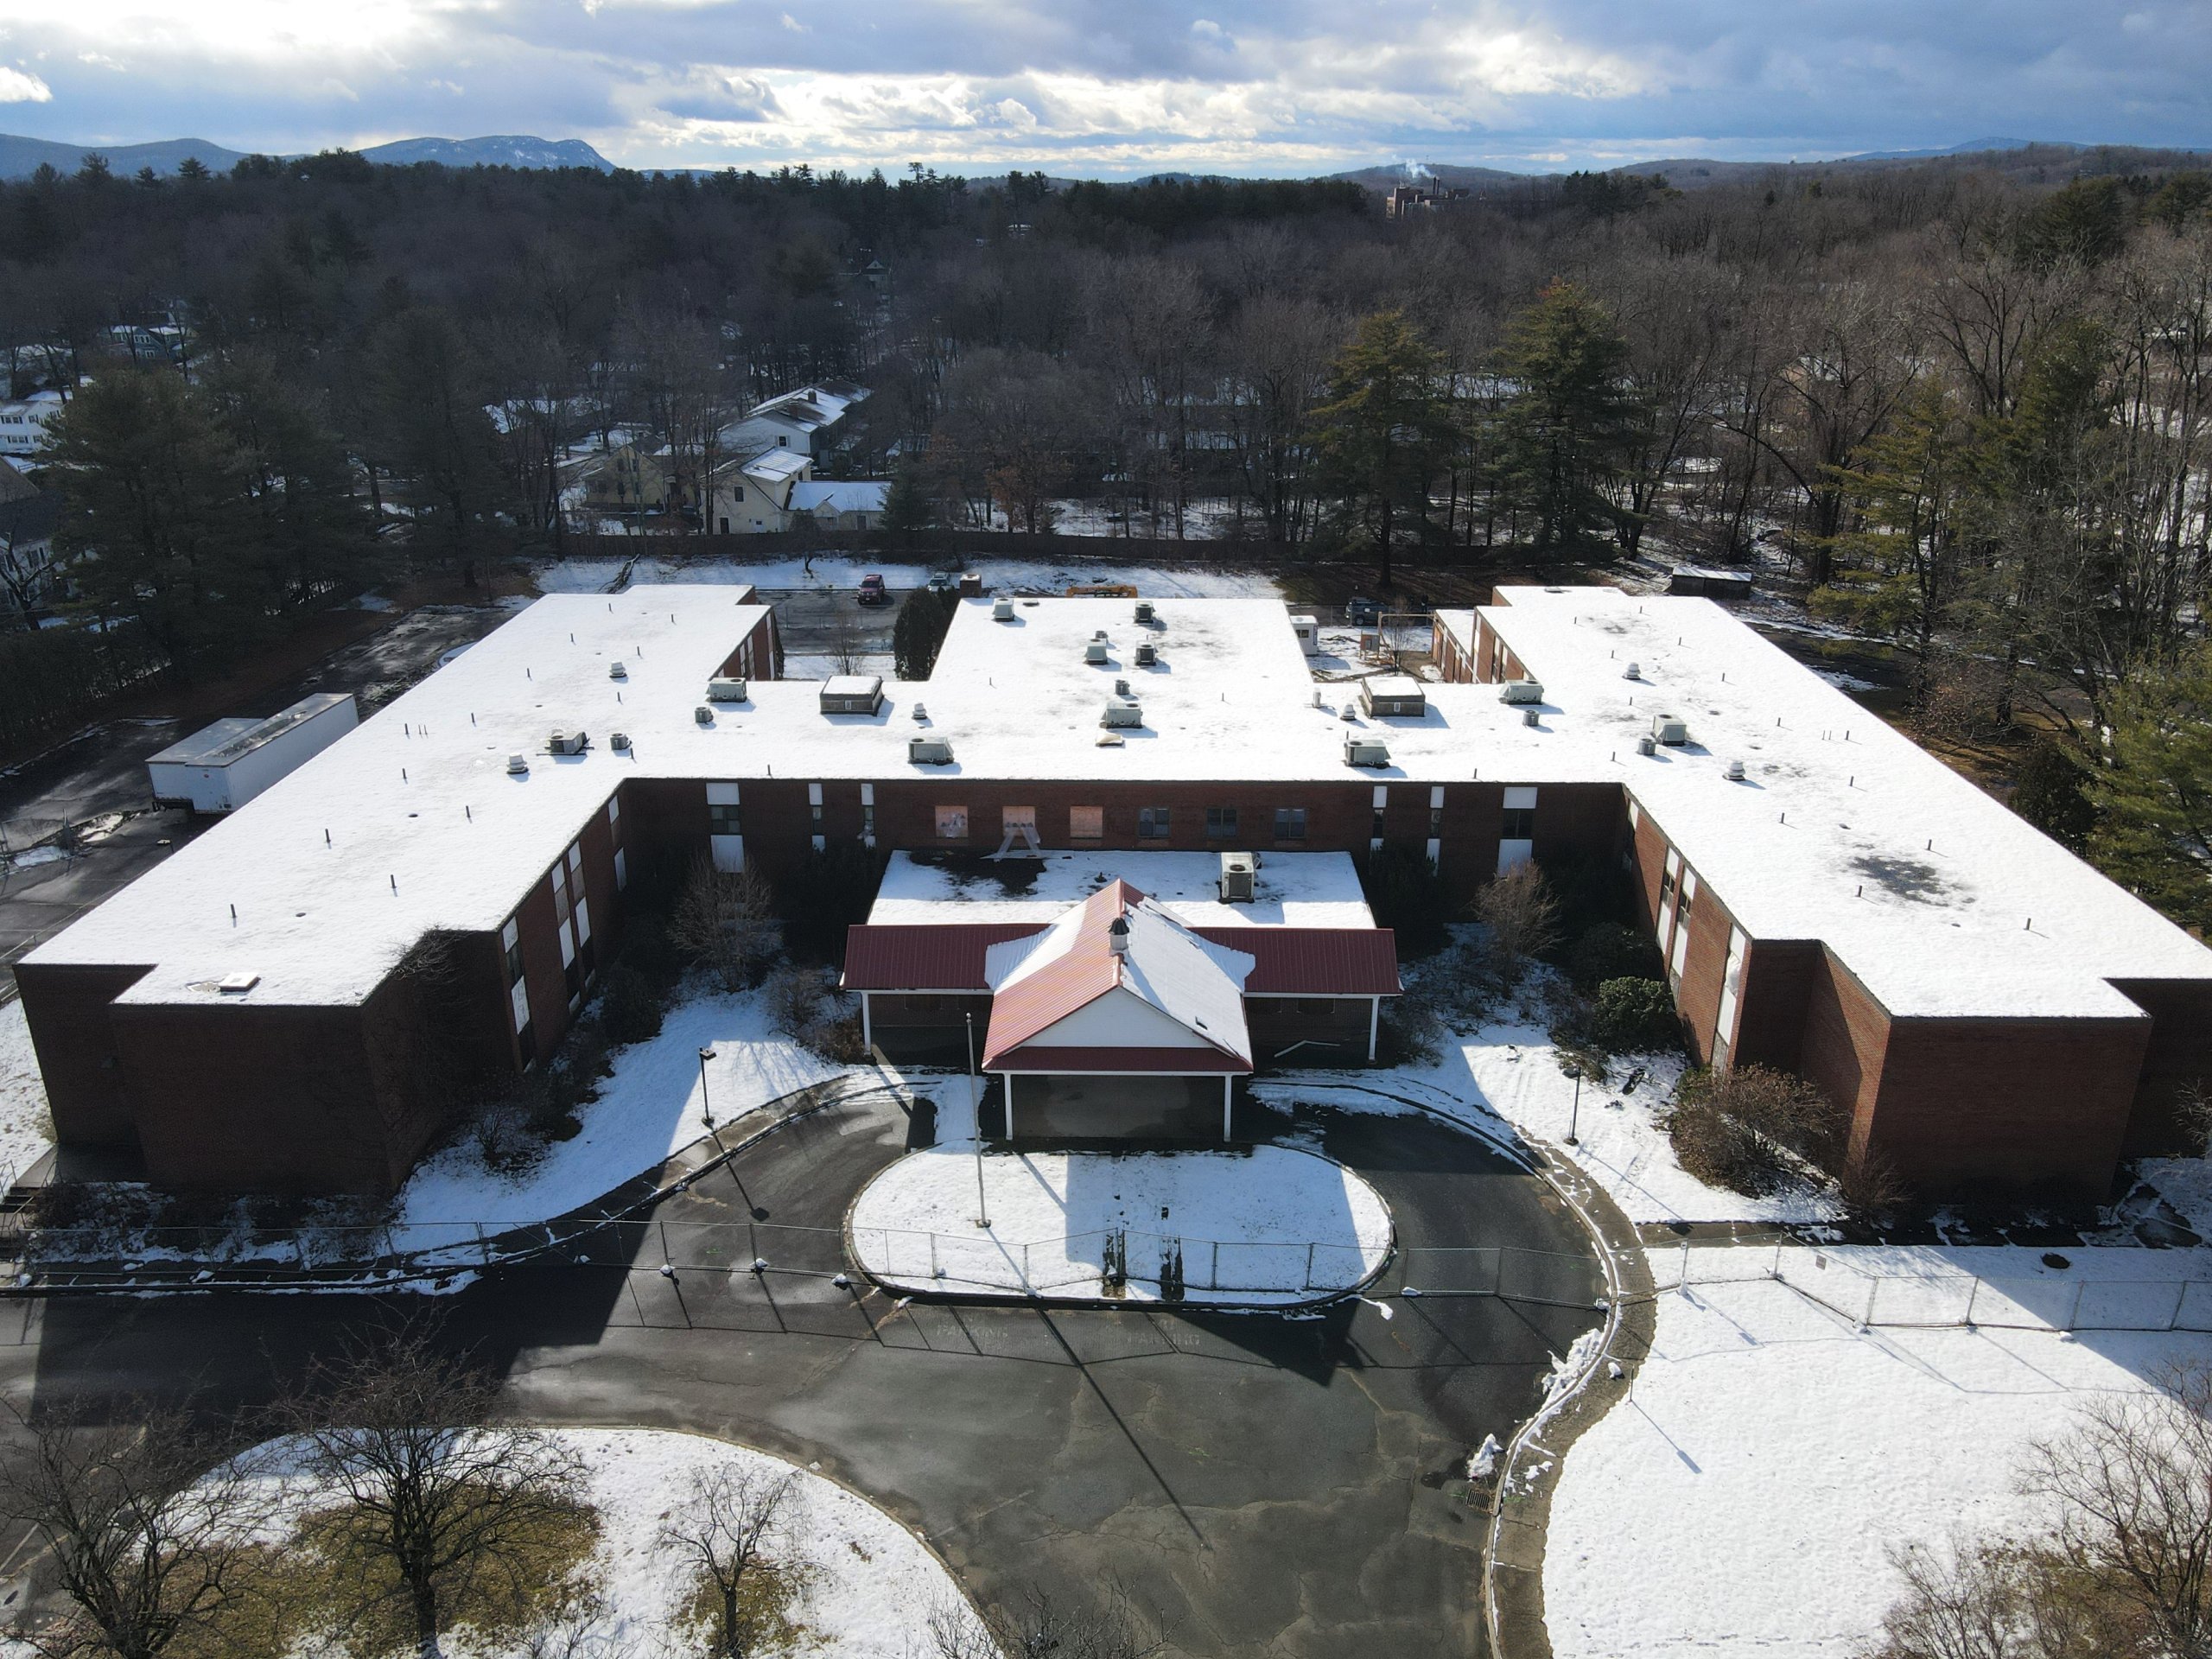 A photo of the old Northampton Nursing Home's entrance from an aerial perspective.